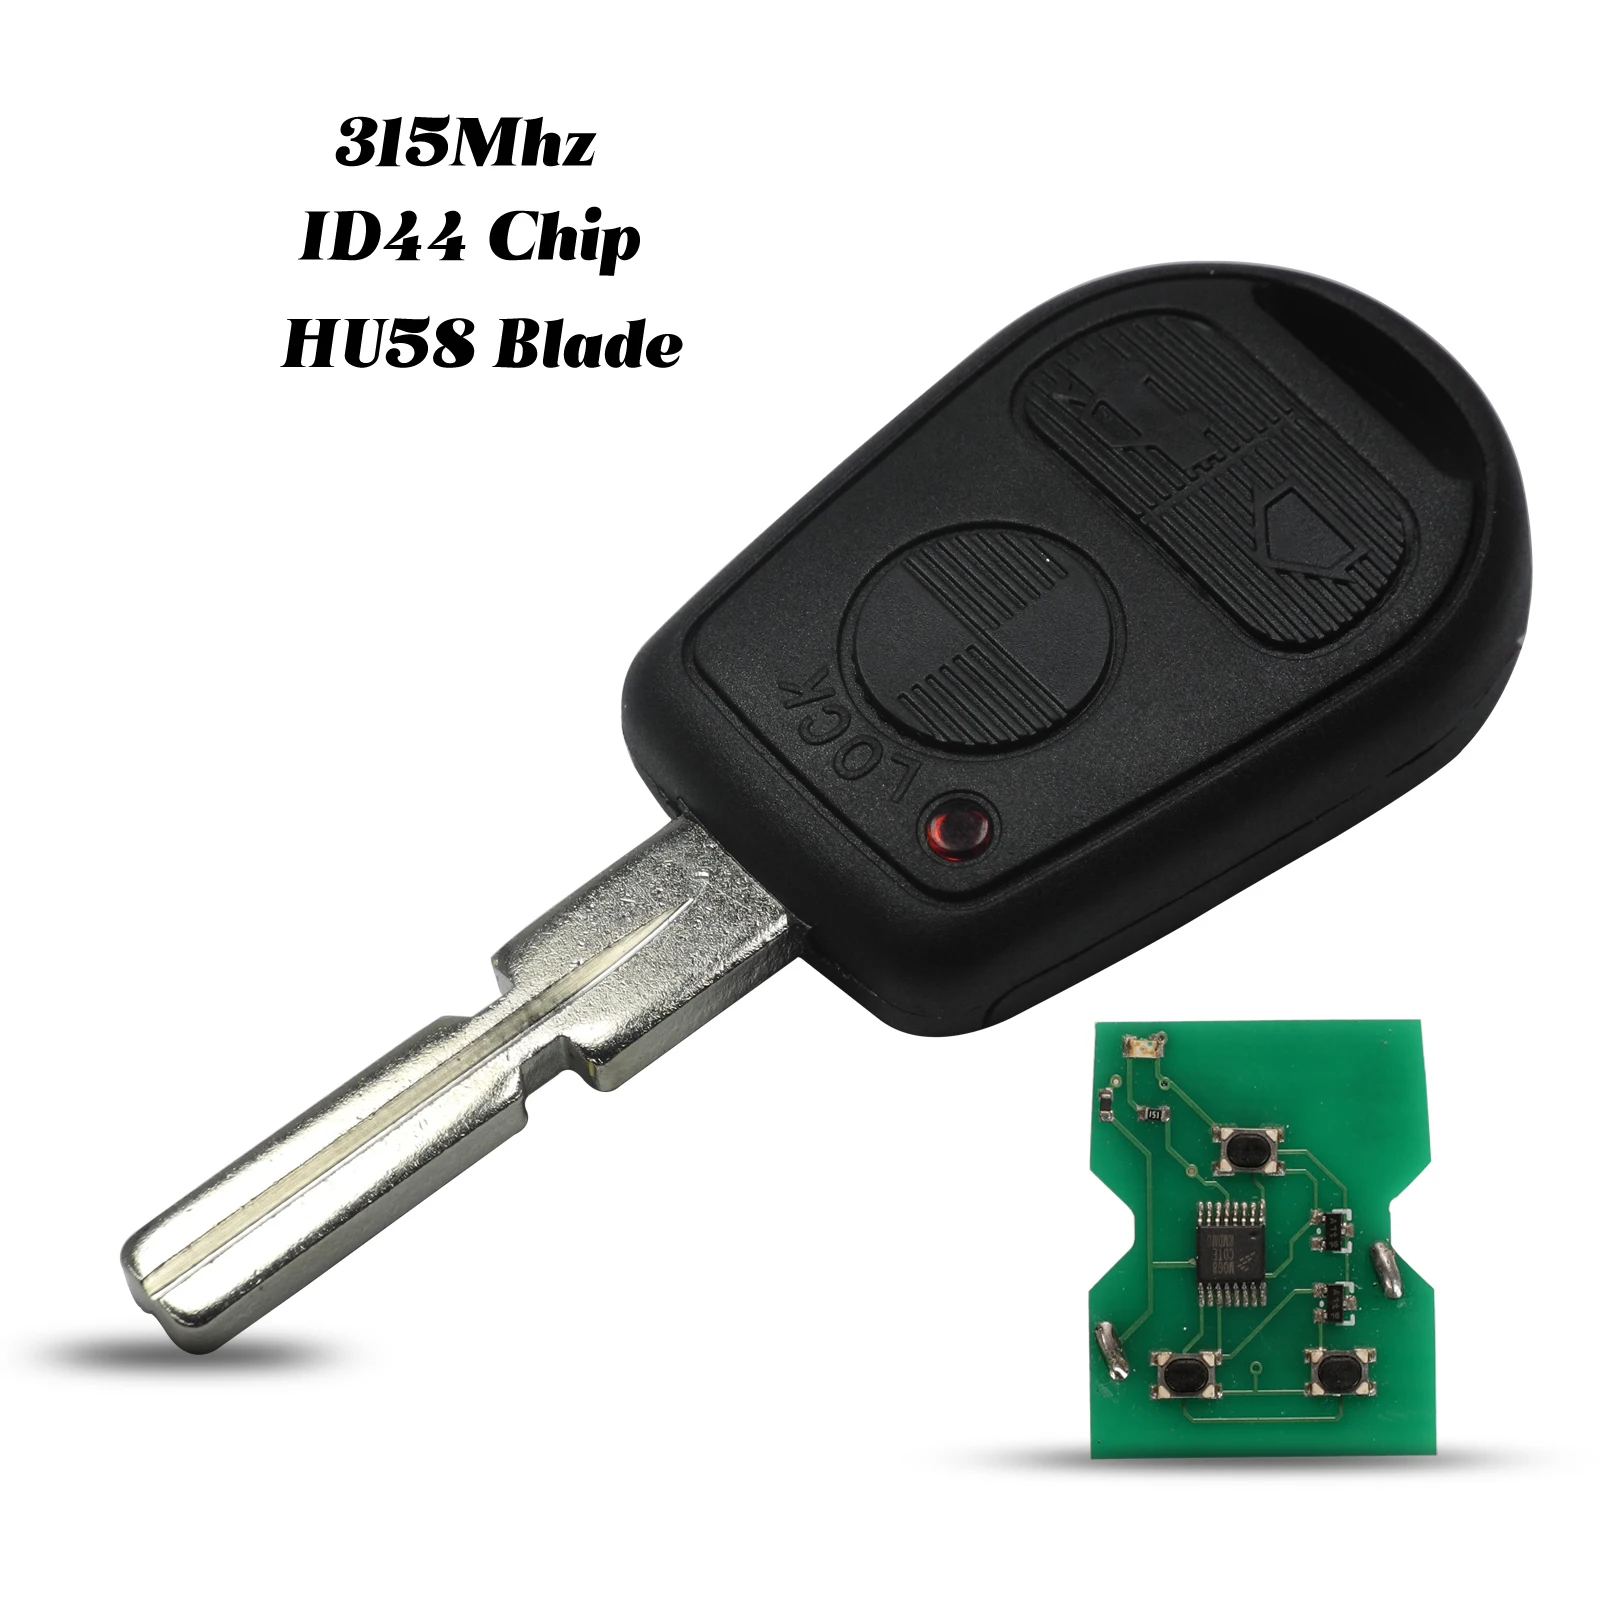 

jingyuqin 3Buttons For BMW Z3 E31 E32 E34 E36 E38 E39 E46 Z3i Remote Car Key 315Mhz ID44 Chip Fob With HU58 Blade Replacement